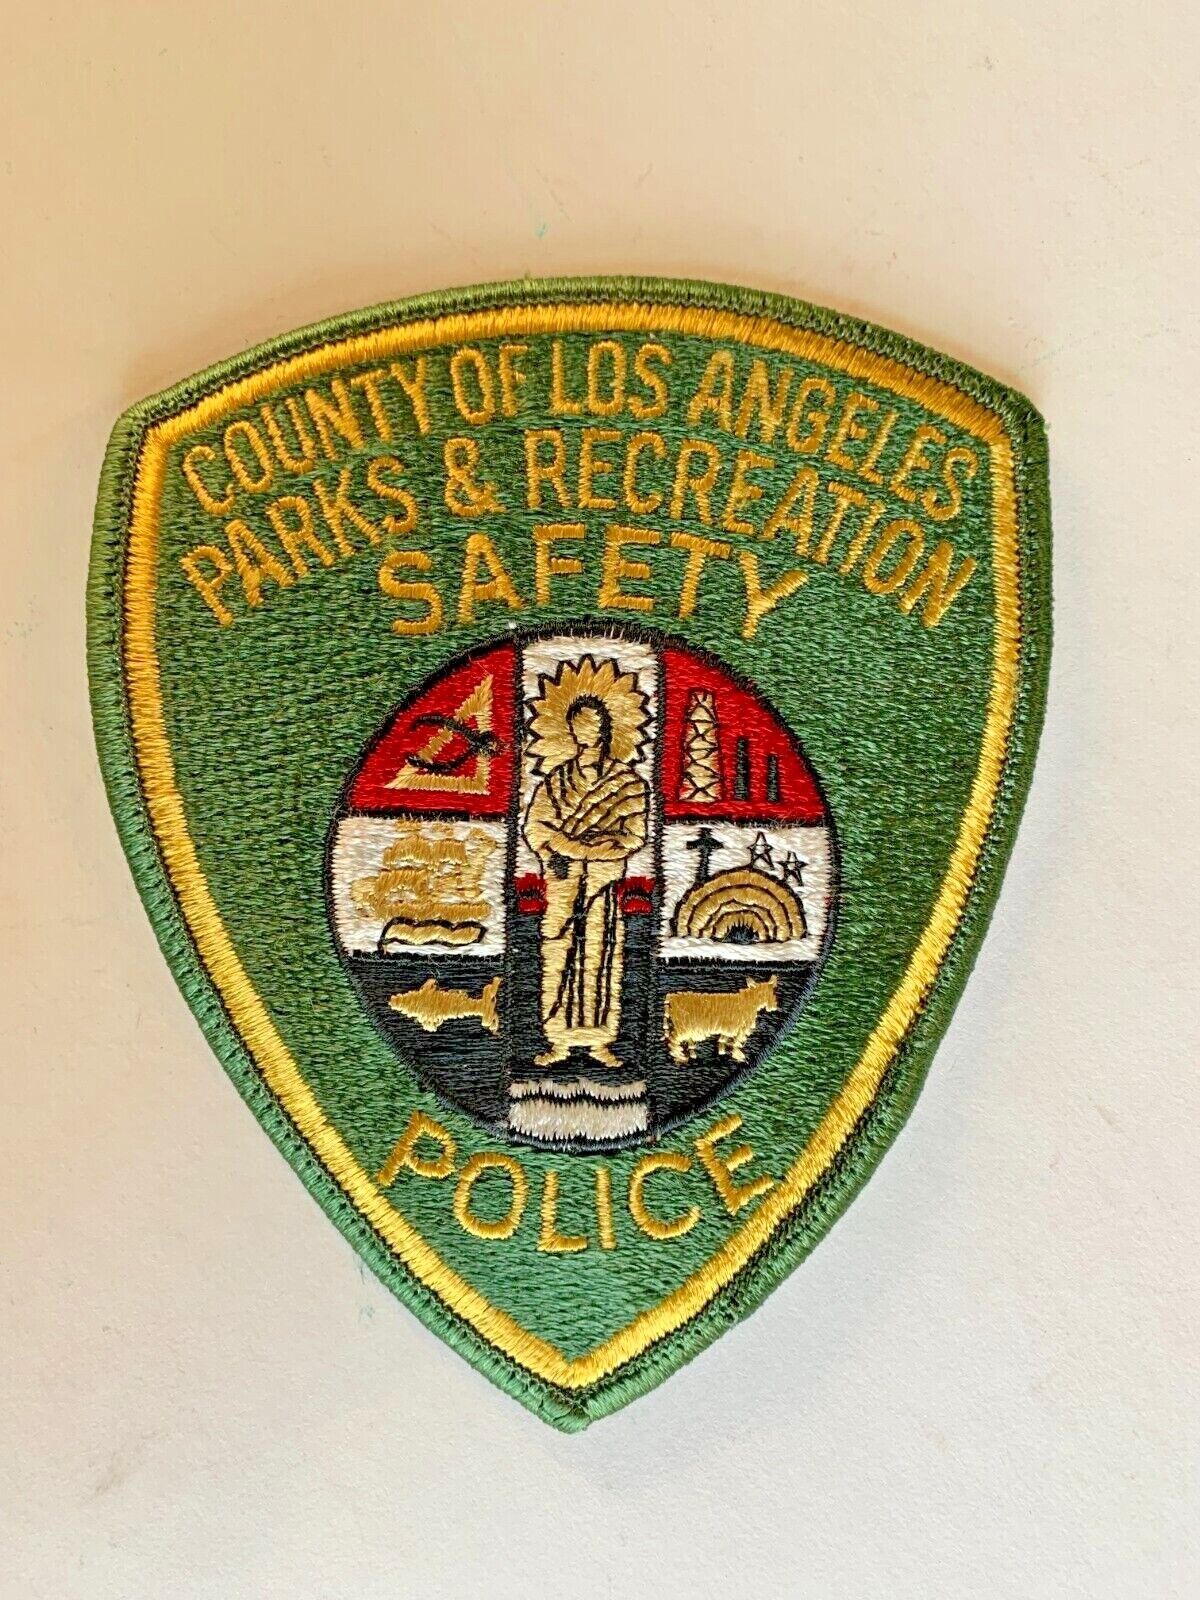 Vintage County of Los Angeles Parks & Recreation Safety Police Patch